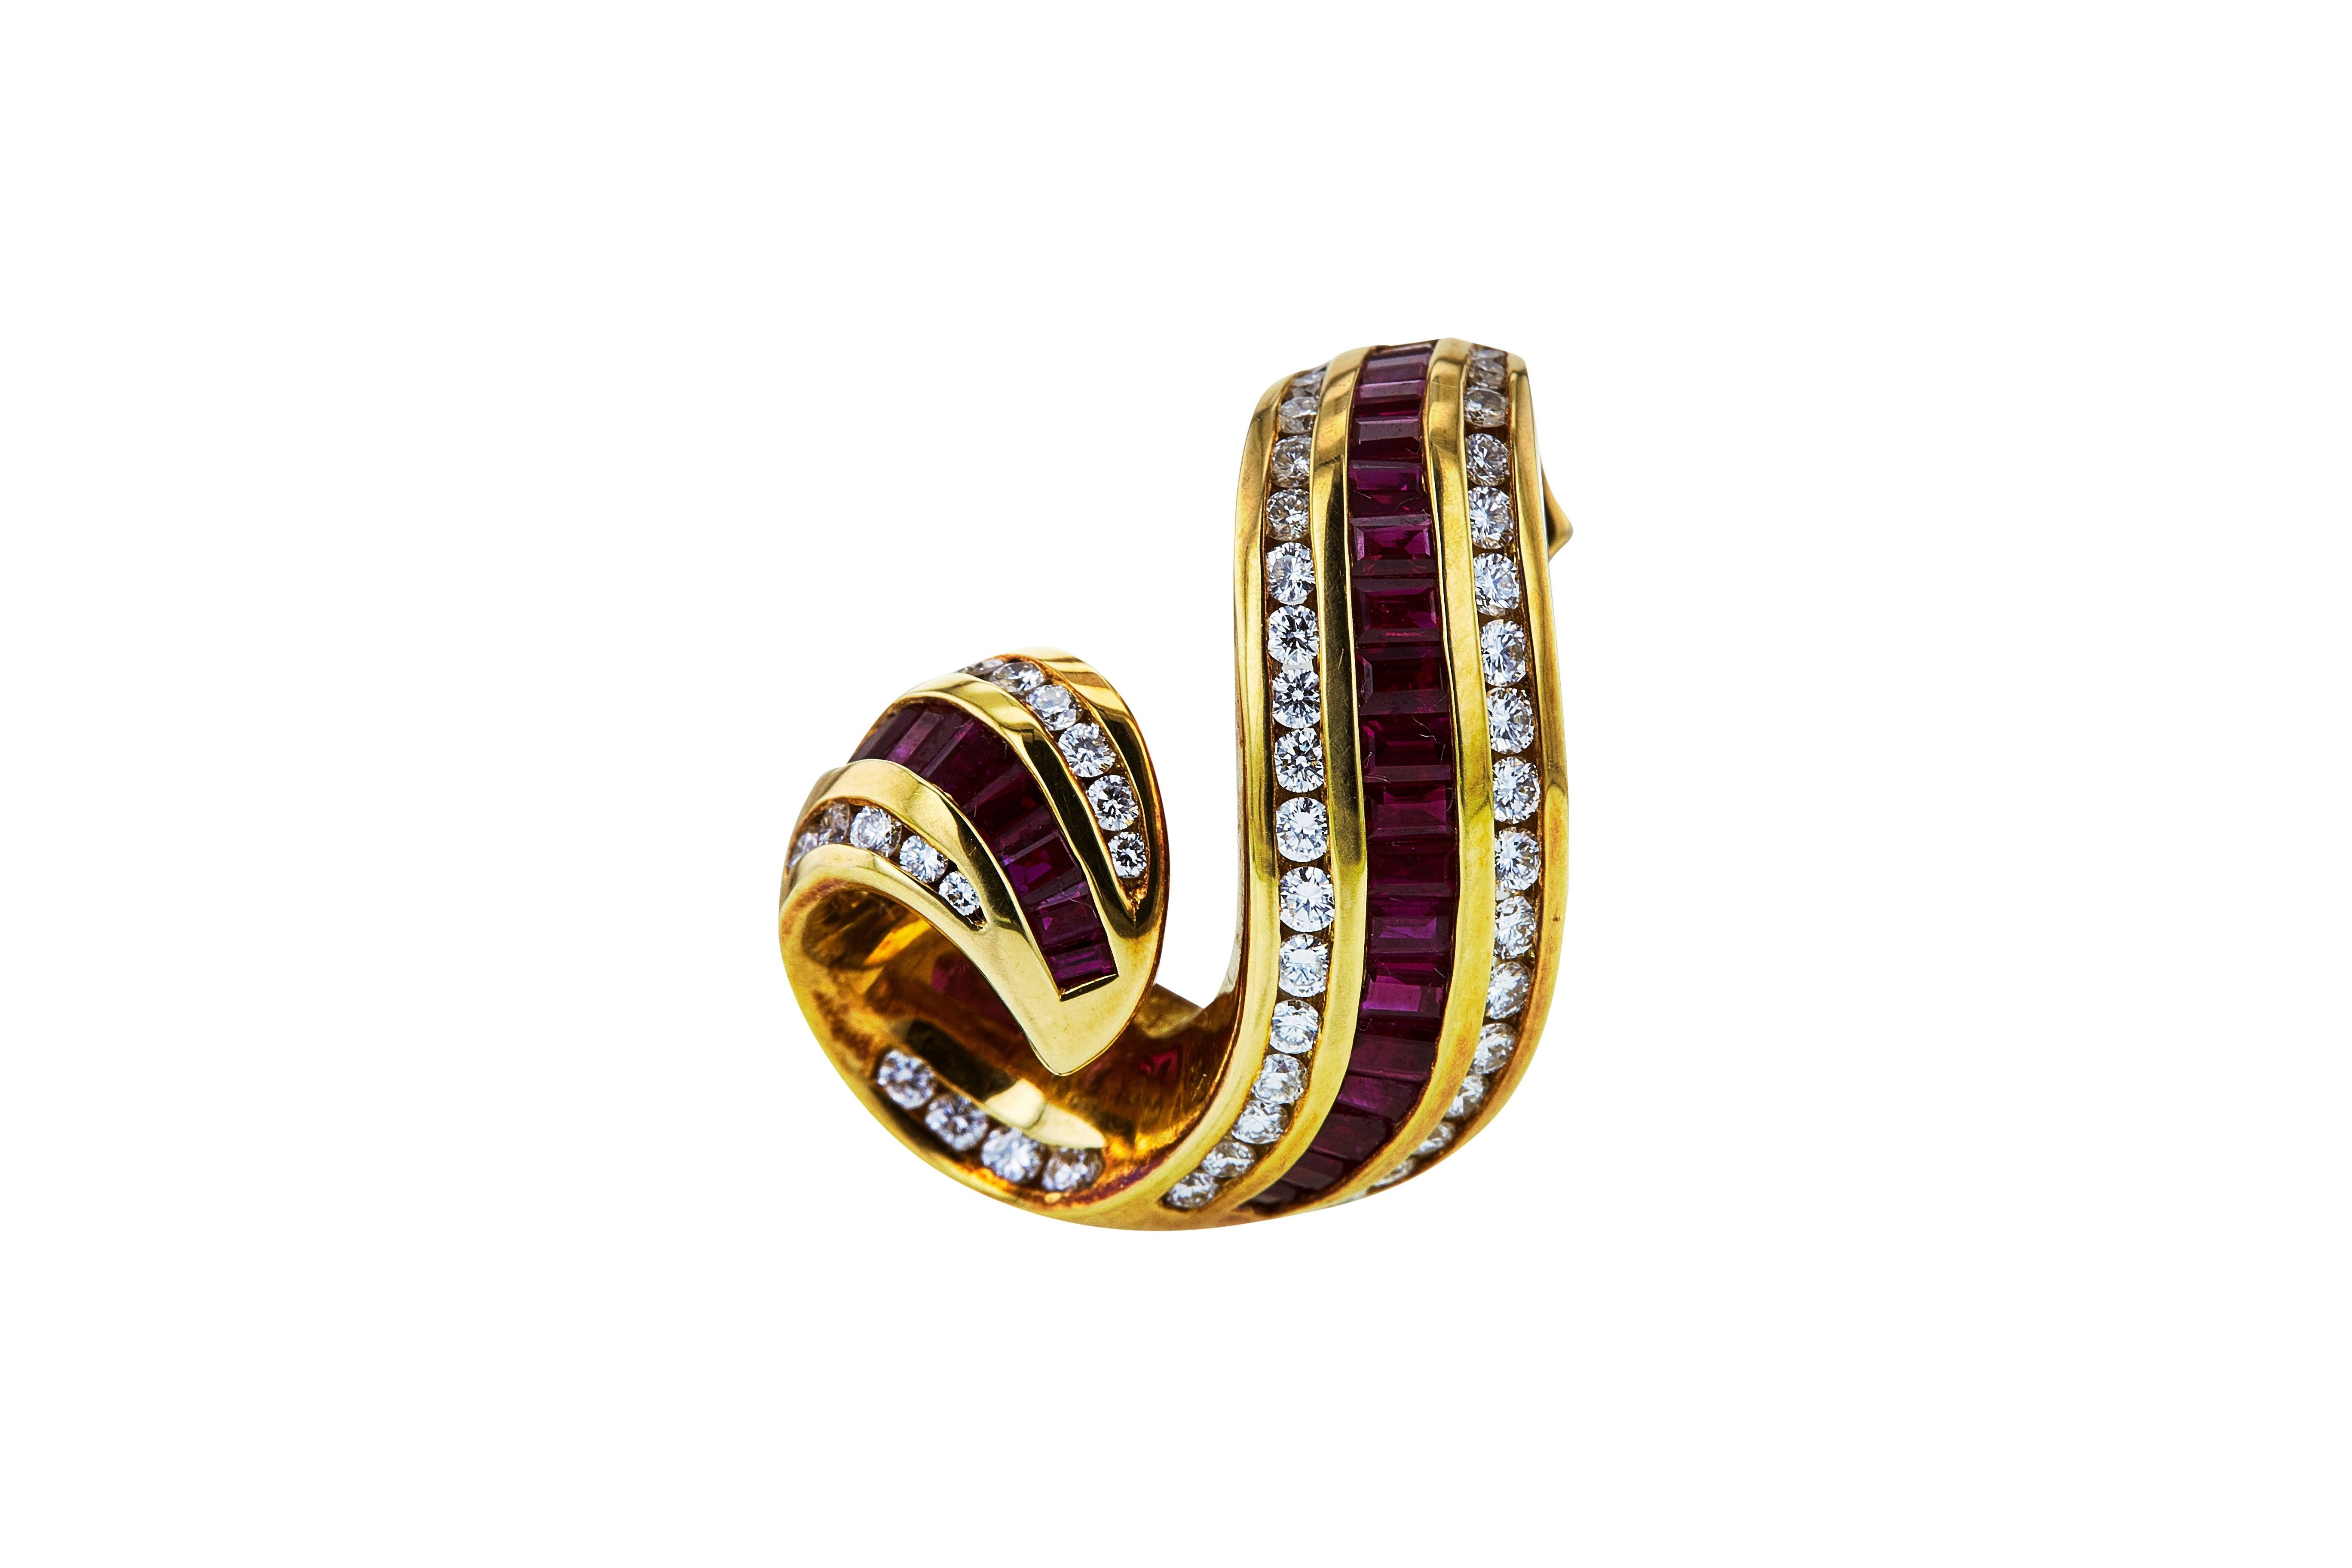 Authentic Charles Krypell free-form slide crafted in 18 karat yellow gold set with ruby baguettes and round brilliant cut diamonds (G/H, VS) weighing approximately 0.79 carats. The pendant measures 1 x ¾ inches and weighs 11.5 grams. Signed Krypell,